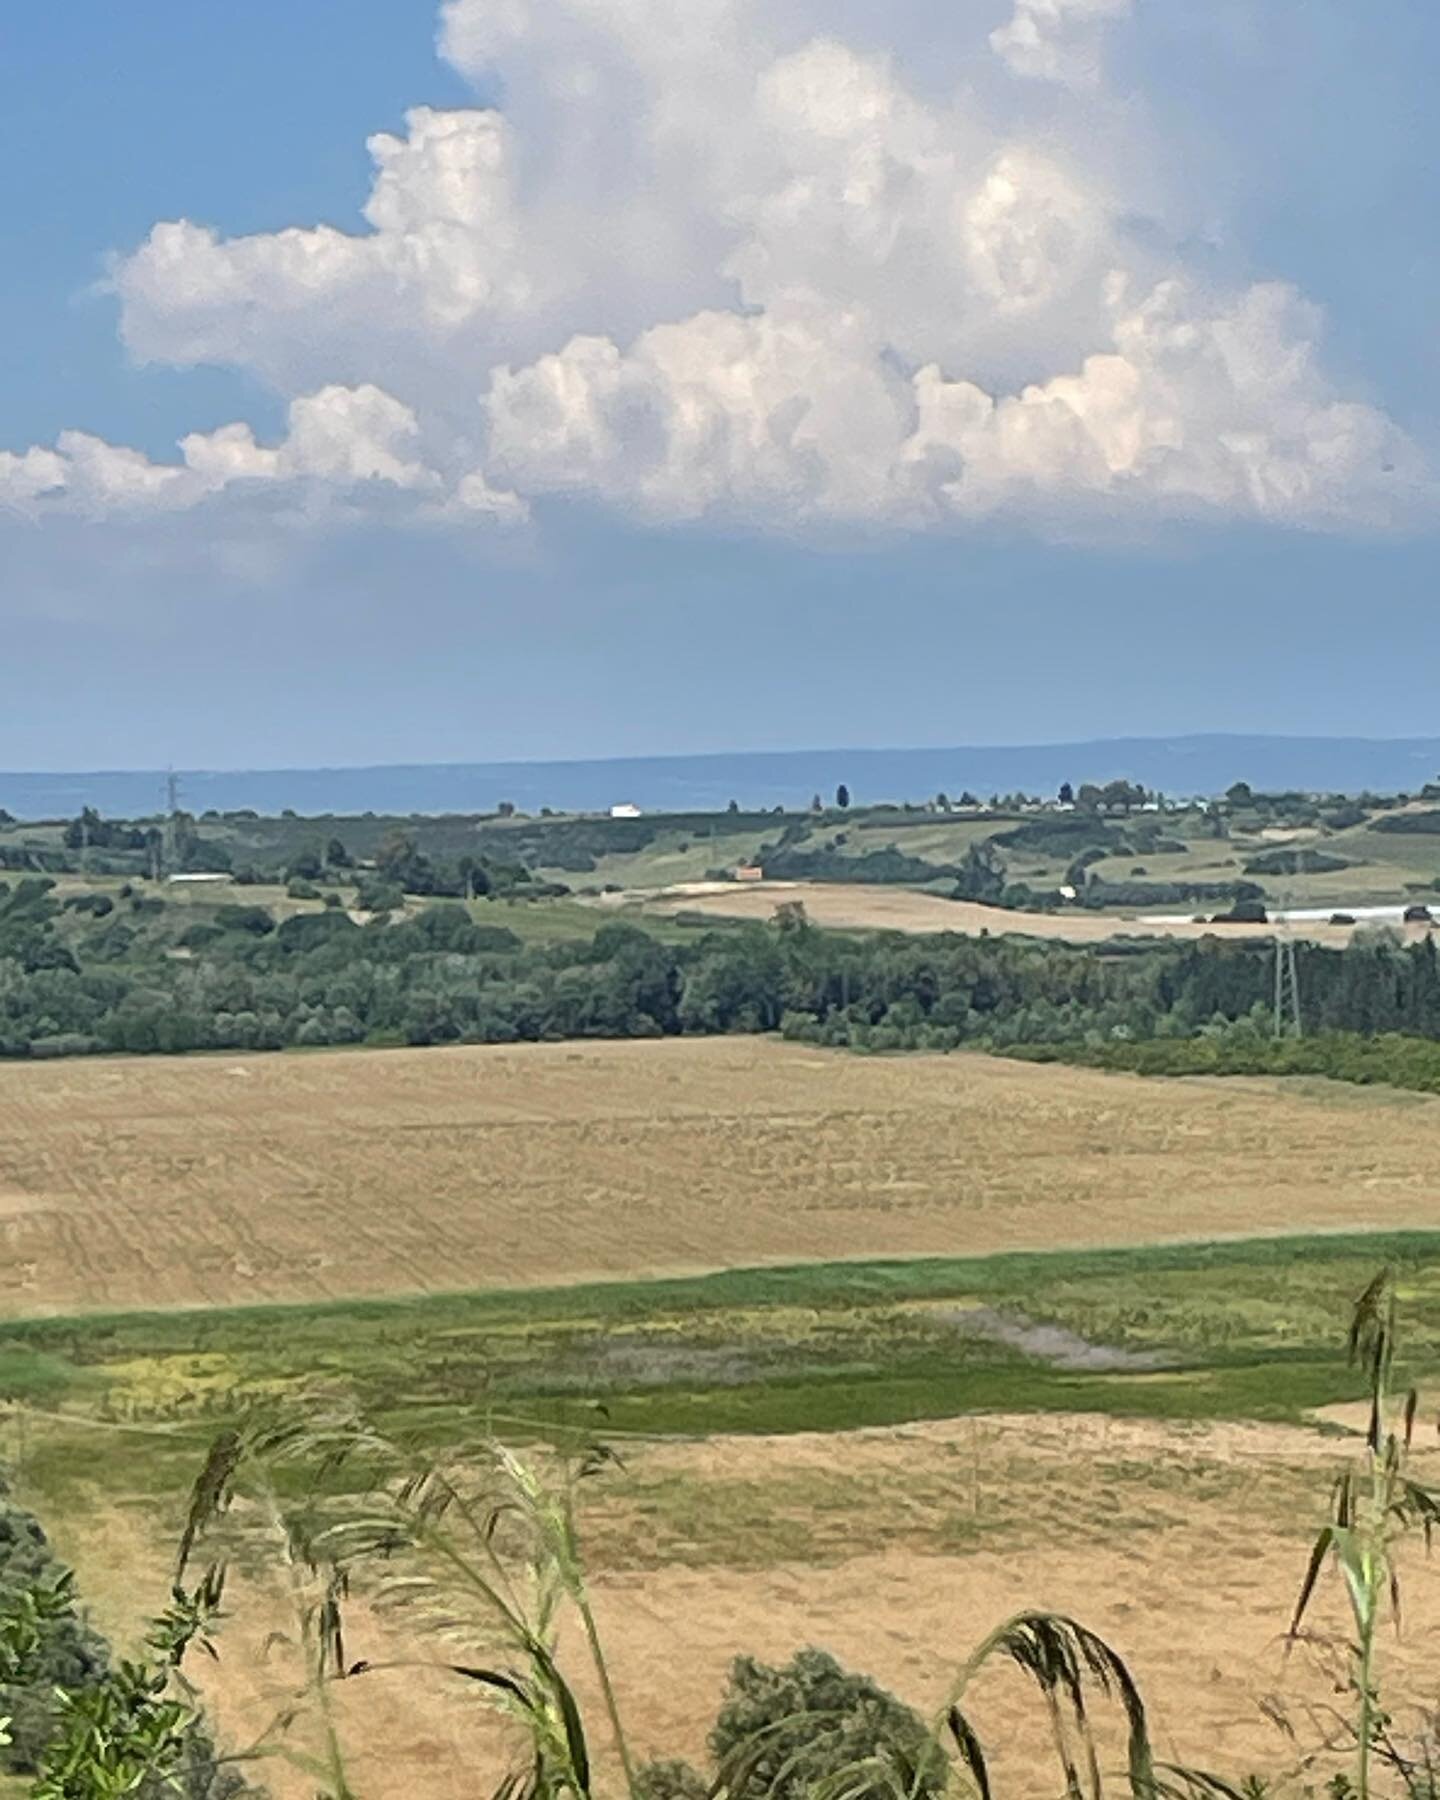 From our perch along the Basento river, we look over the neighboring hills towards San Biagio and consider the ancient pathways linking these places. #Incoronata #metaponto #bernalda #pisticci #pisticcipostomagico #bernaldabella #beautifulbasilicata 